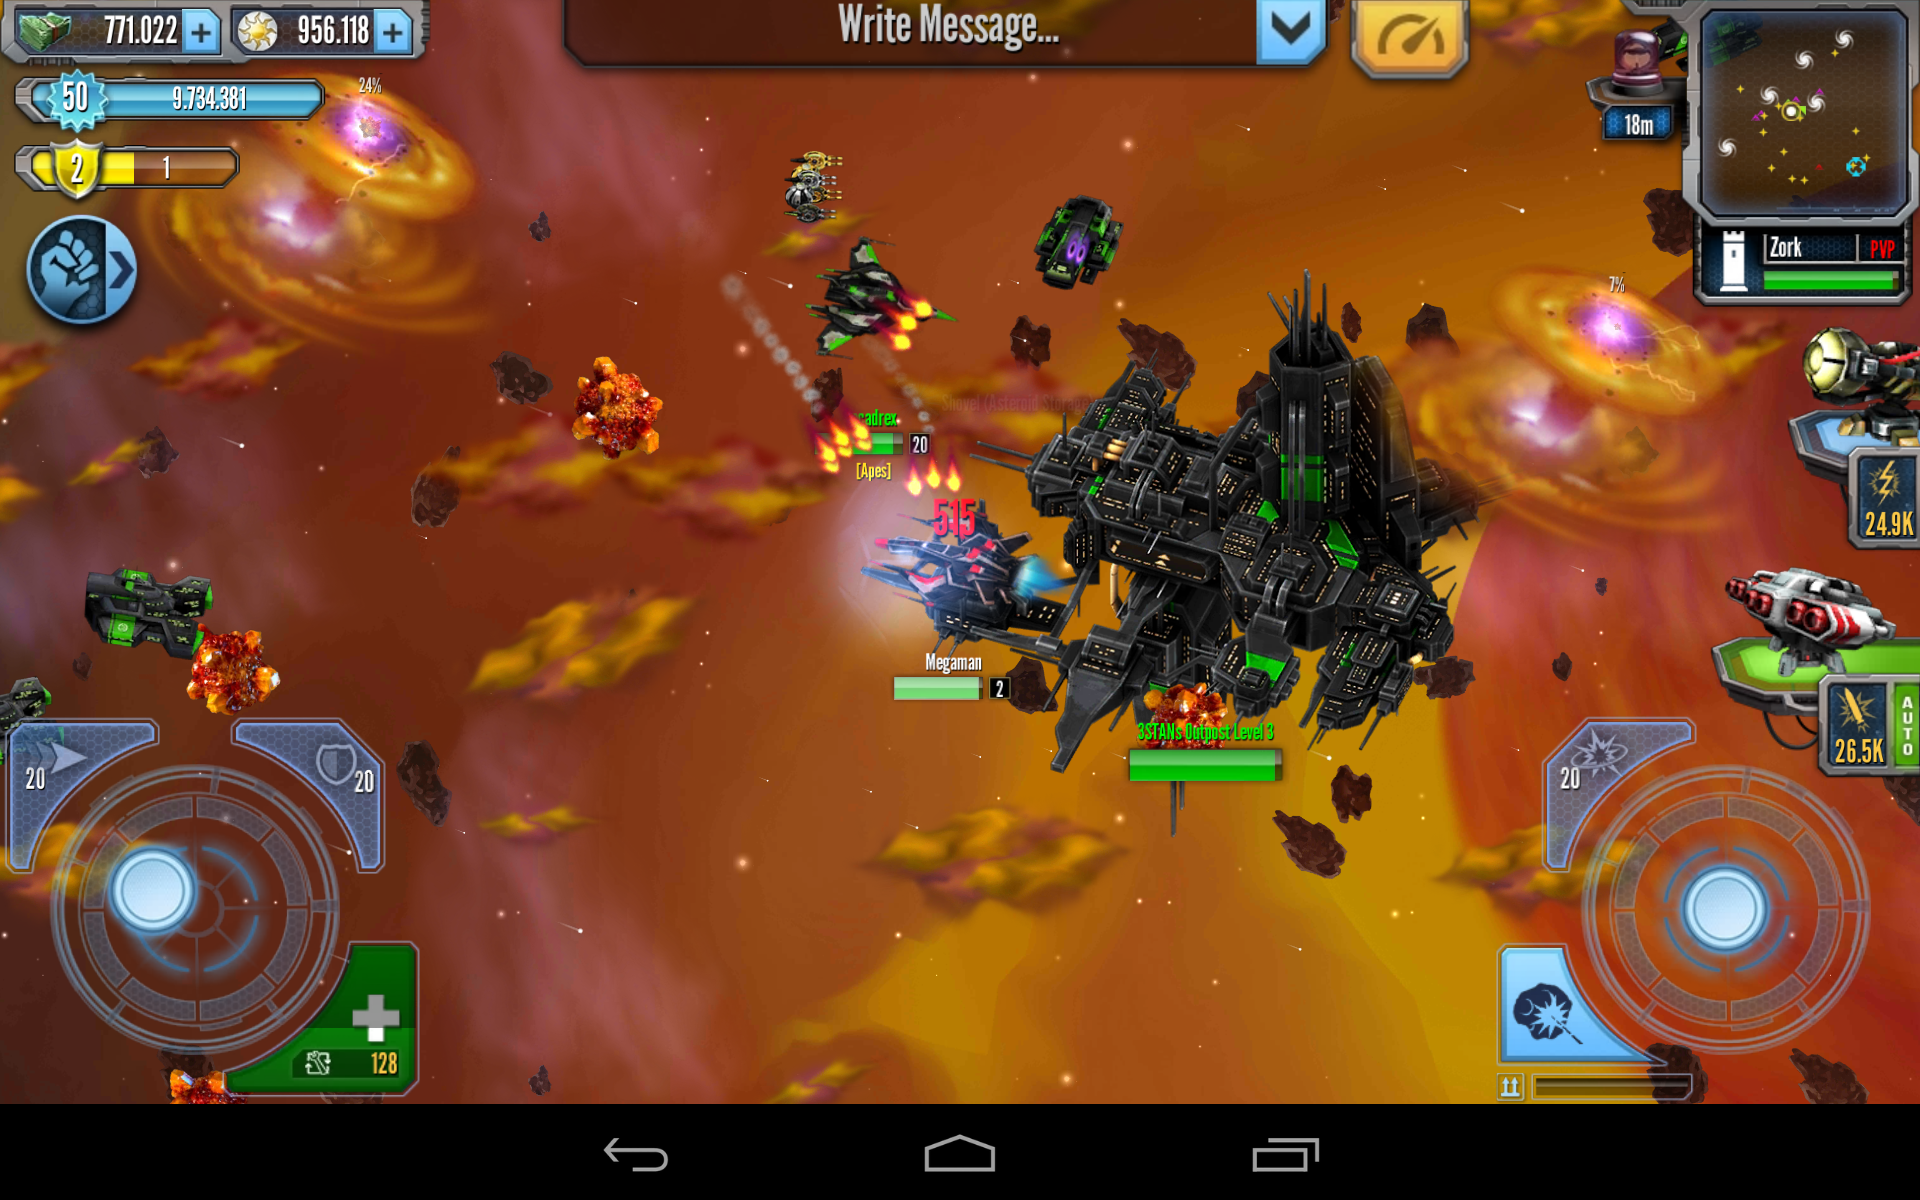 Pocket Starships blends fast-paced massively multiplayer space combat with an easy-to-use crafting system.